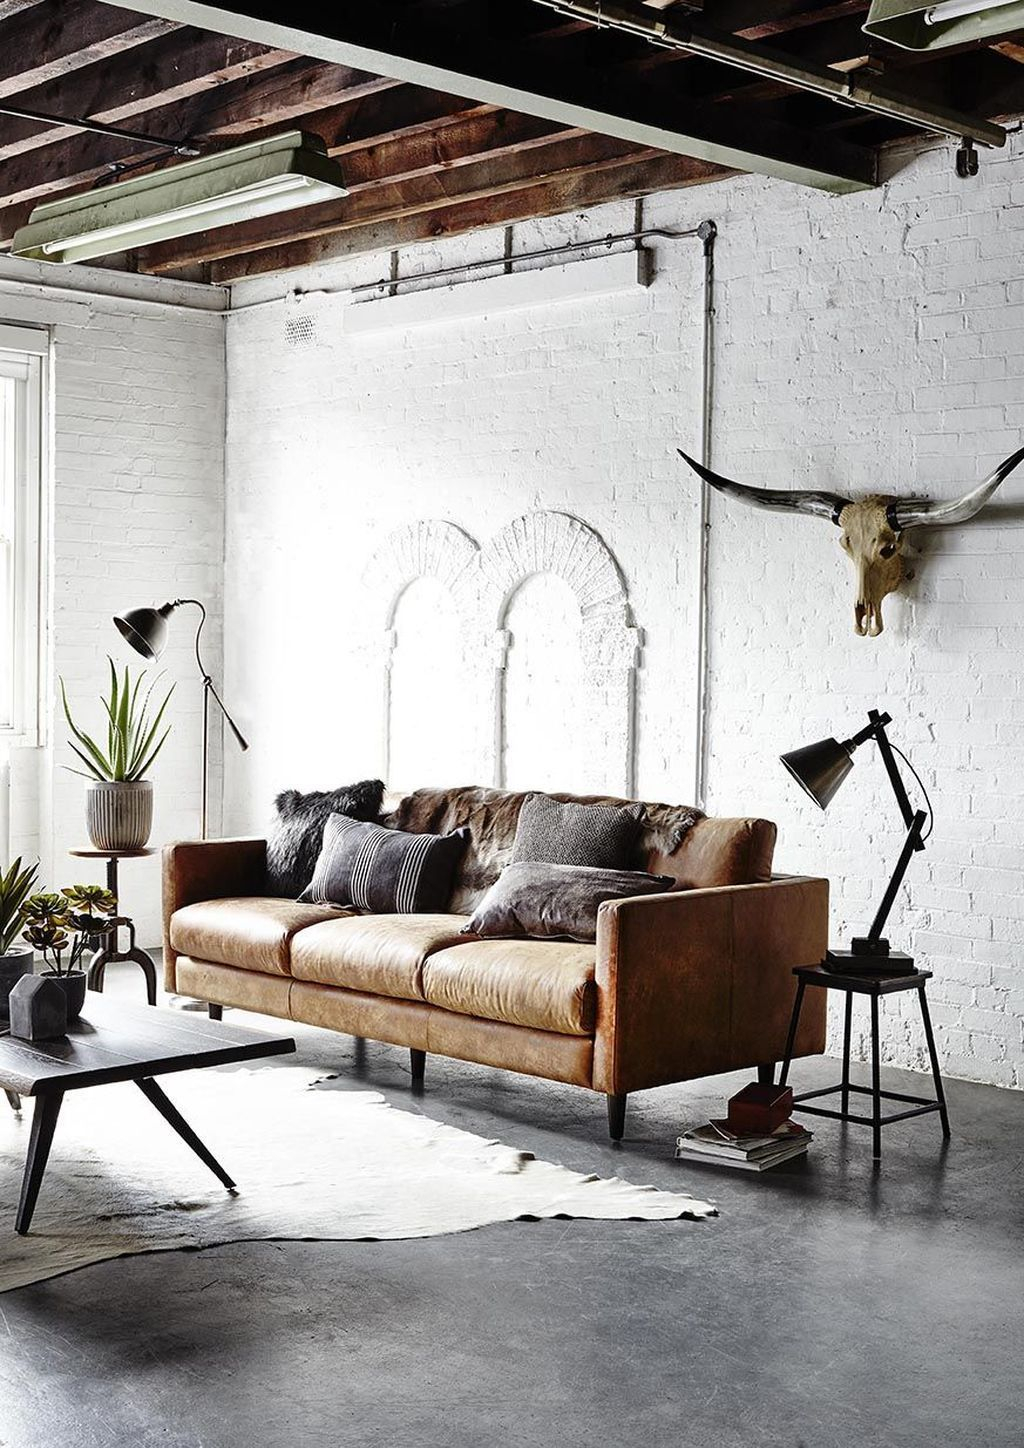 The Best Decorations Industrial Style Living Room That Will Amaze Your Guests37